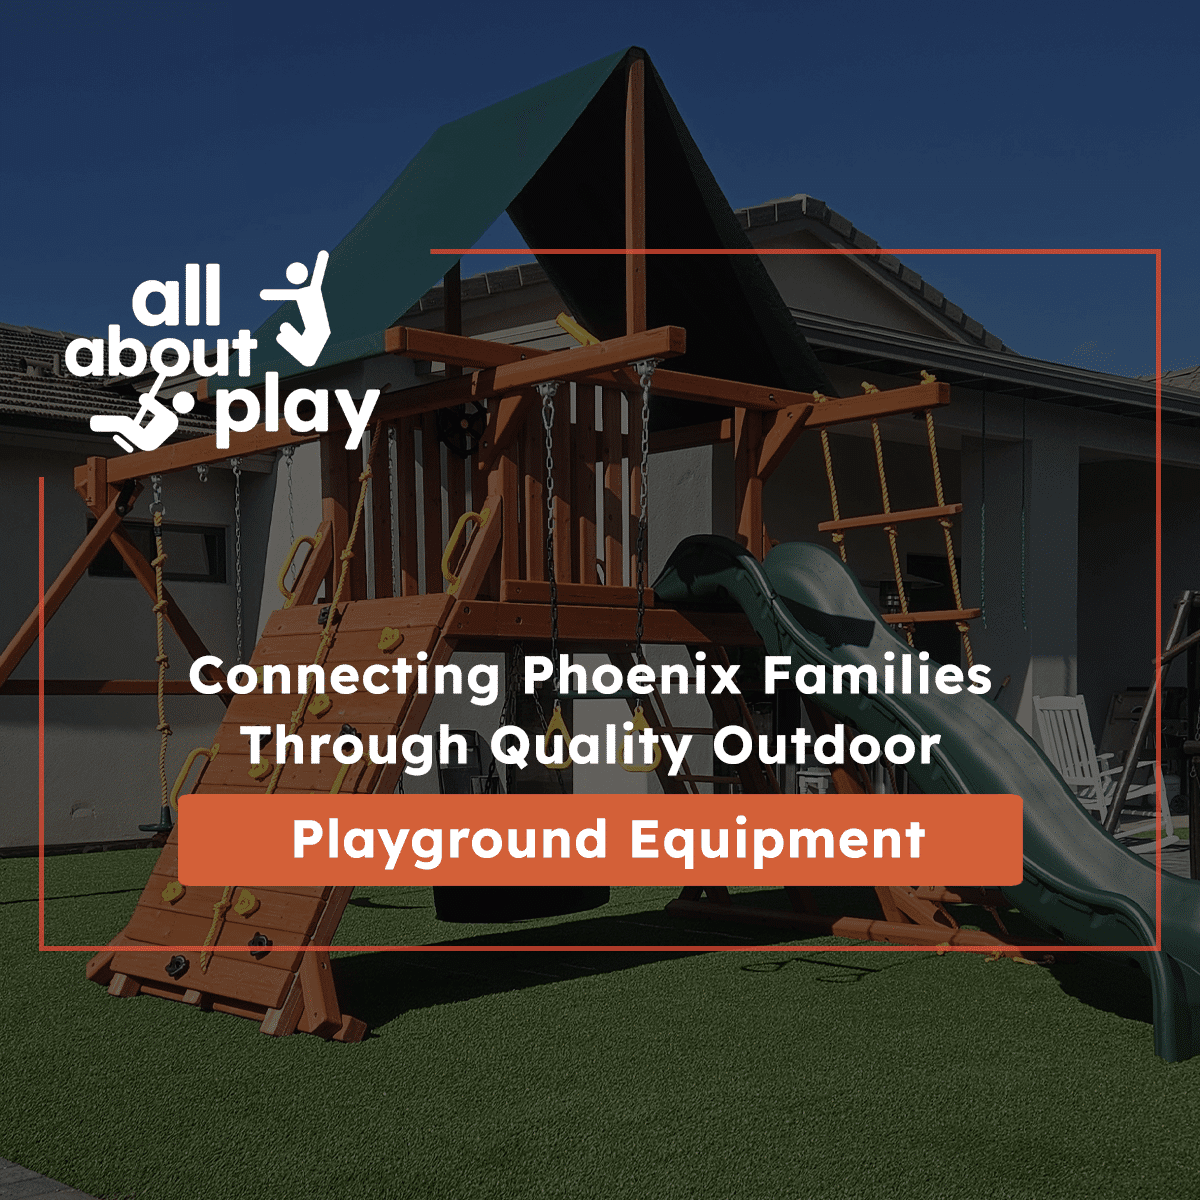 Connecting Phoenix Families Through Quality Outdoor Playground Equipment